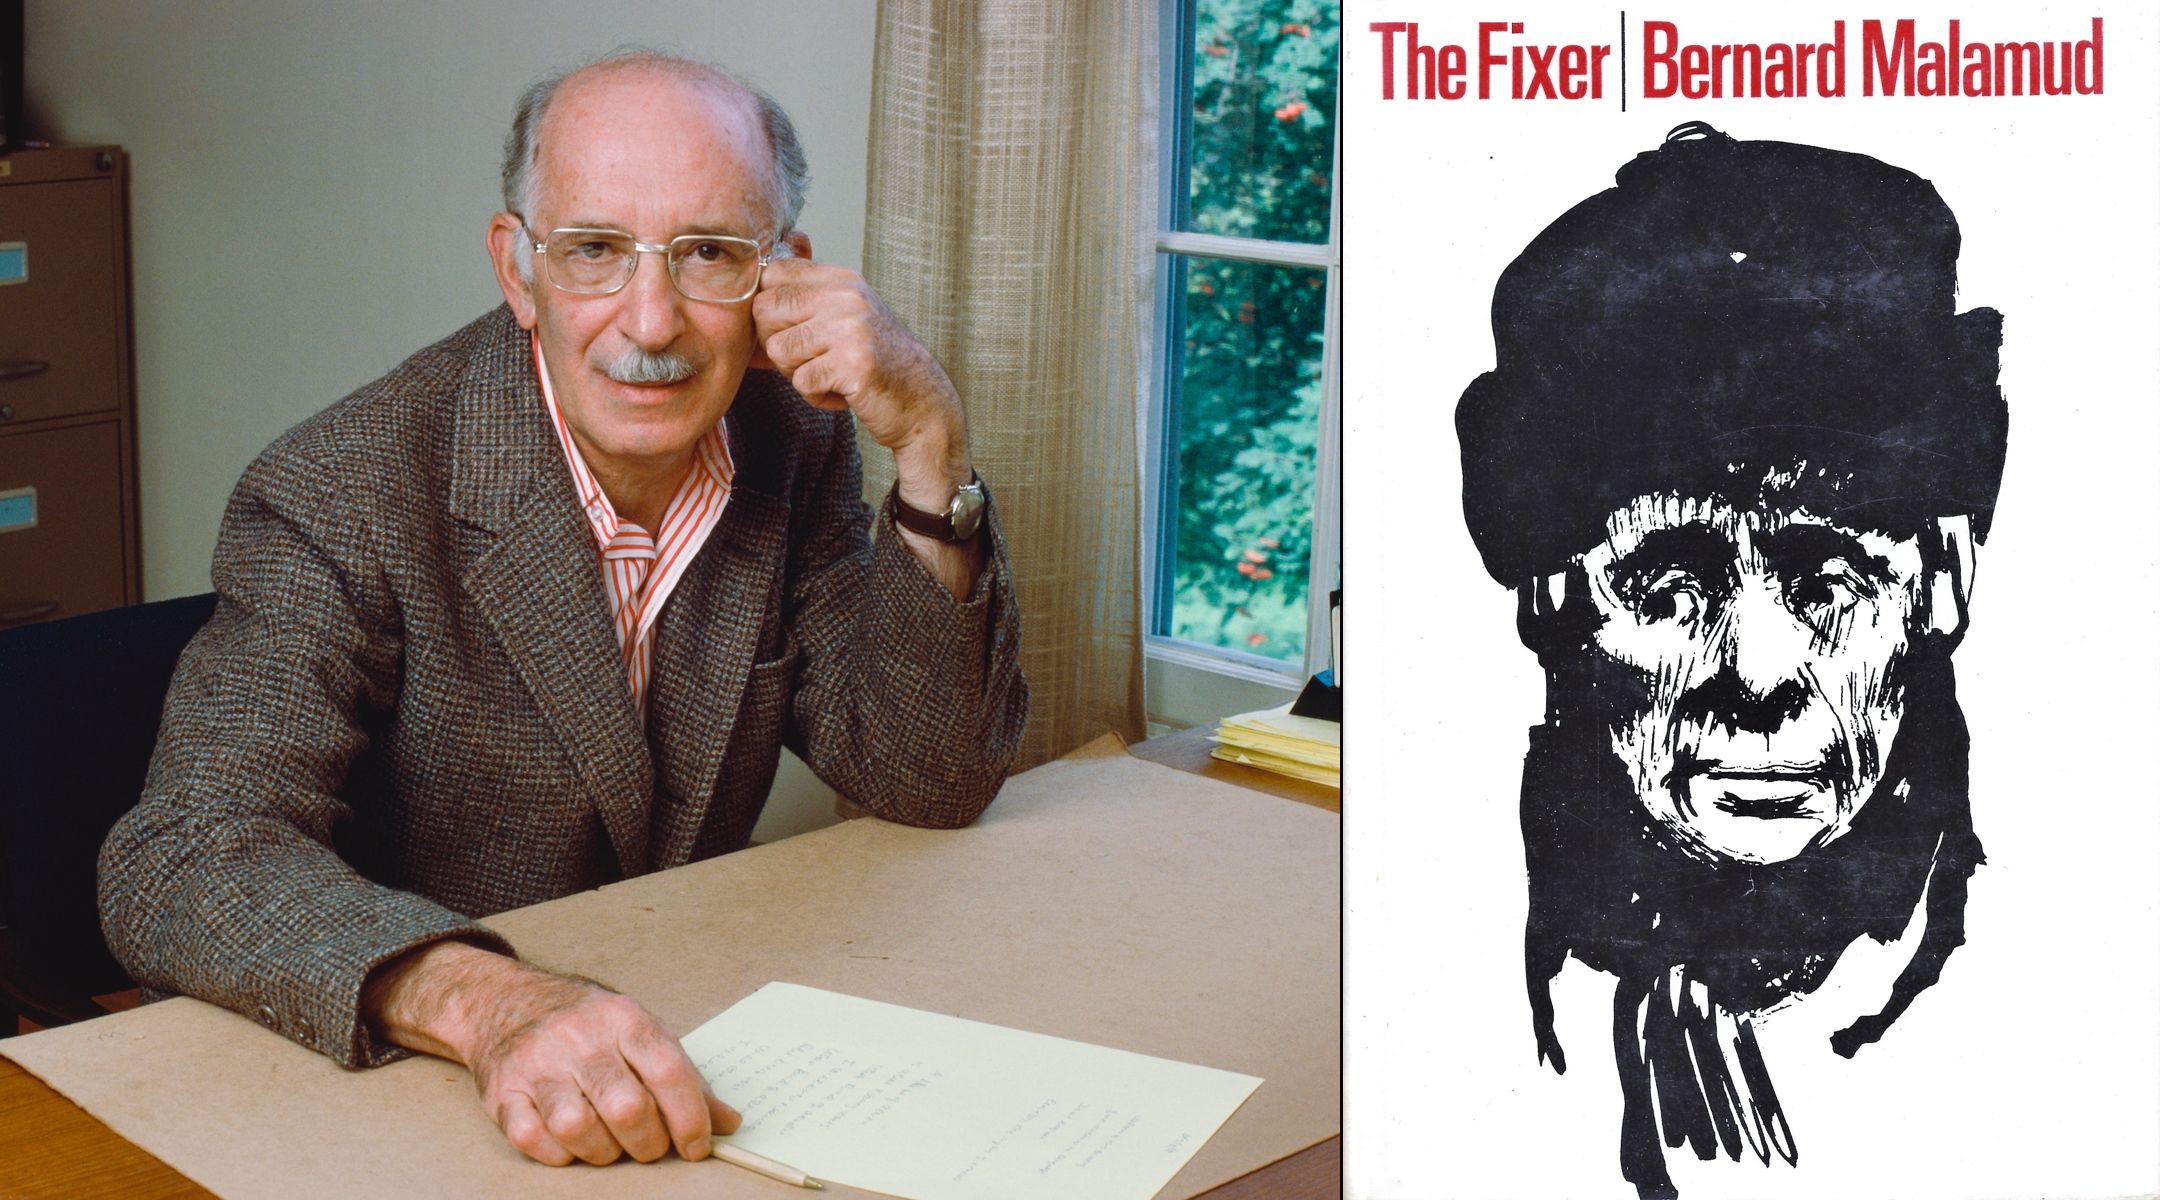 Bernard Malamud, author of “The Fixer,” a 1966 novel about an antisemitic blood libel. (Left: Nancy R. Schiff/Getty Images)